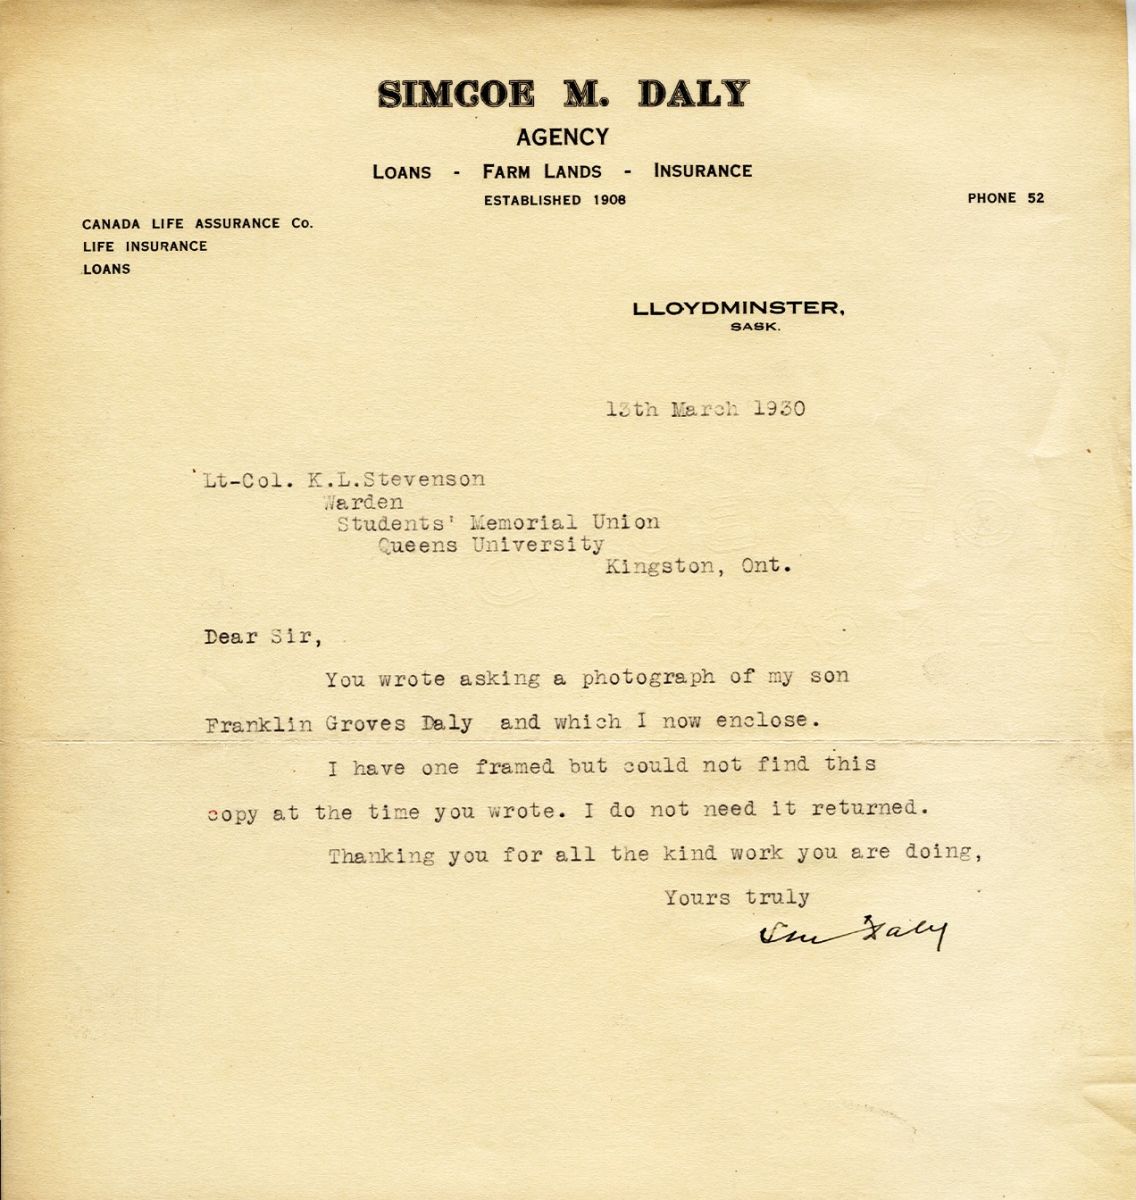 Letter from Simcoe M. Daly to Lt. Col. K.L. Stevenson, 13th March 1930